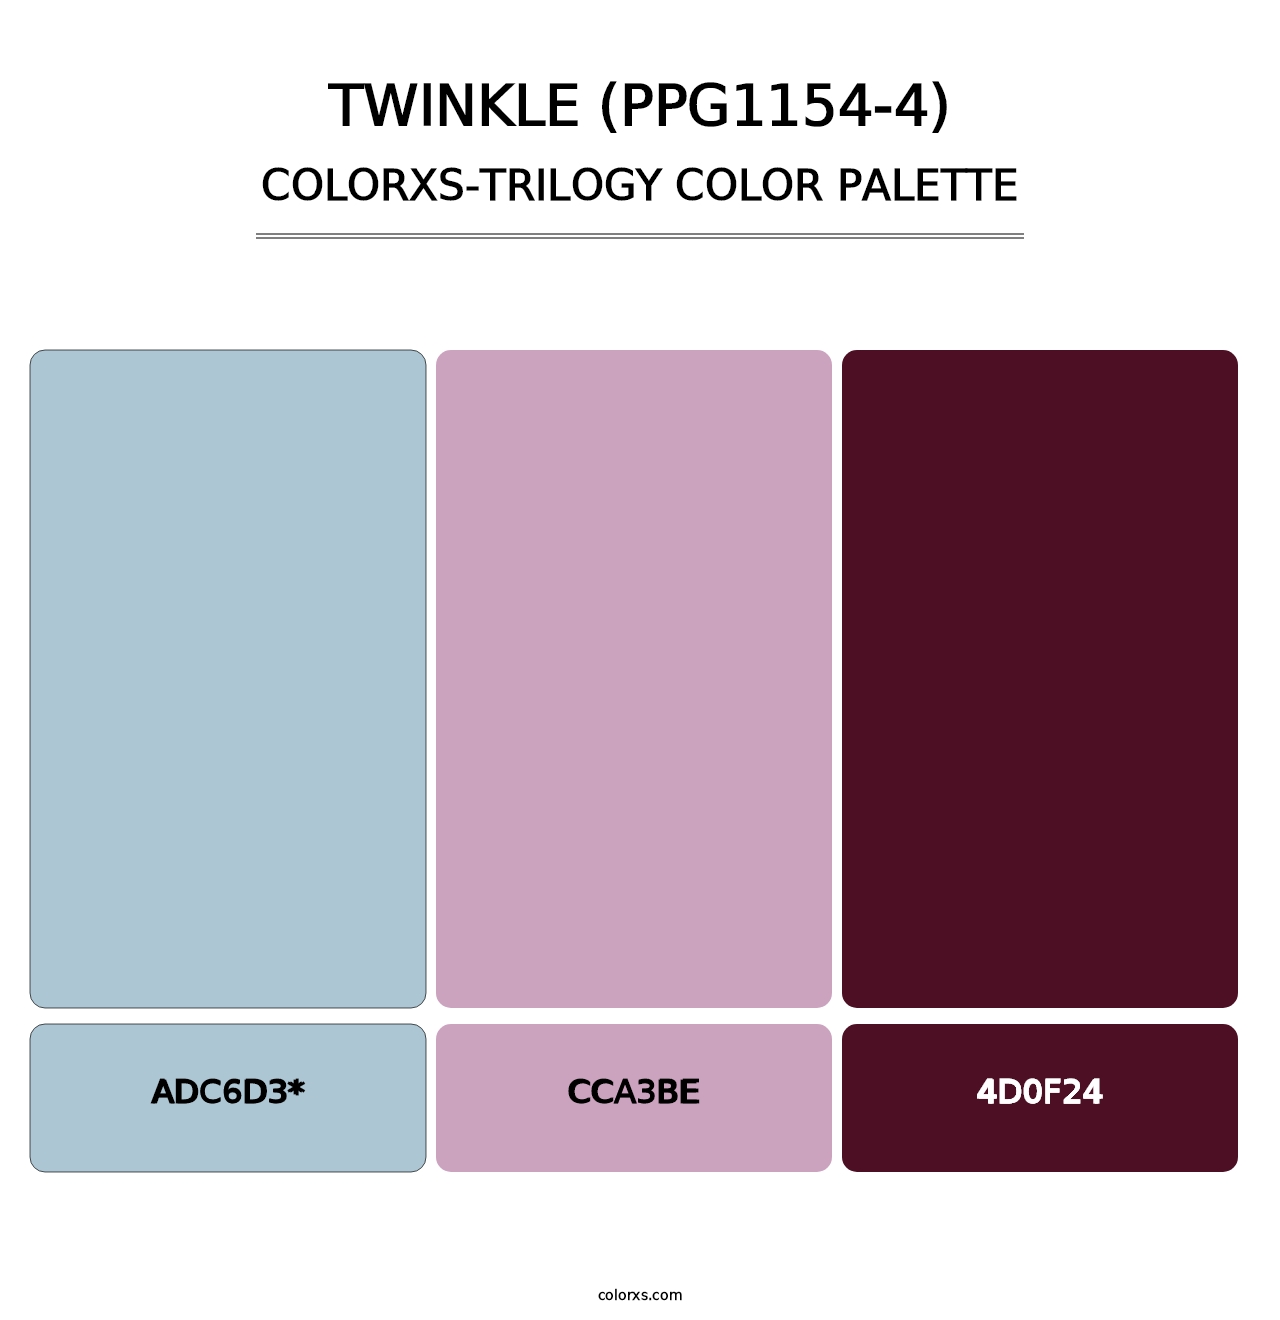 Twinkle (PPG1154-4) - Colorxs Trilogy Palette